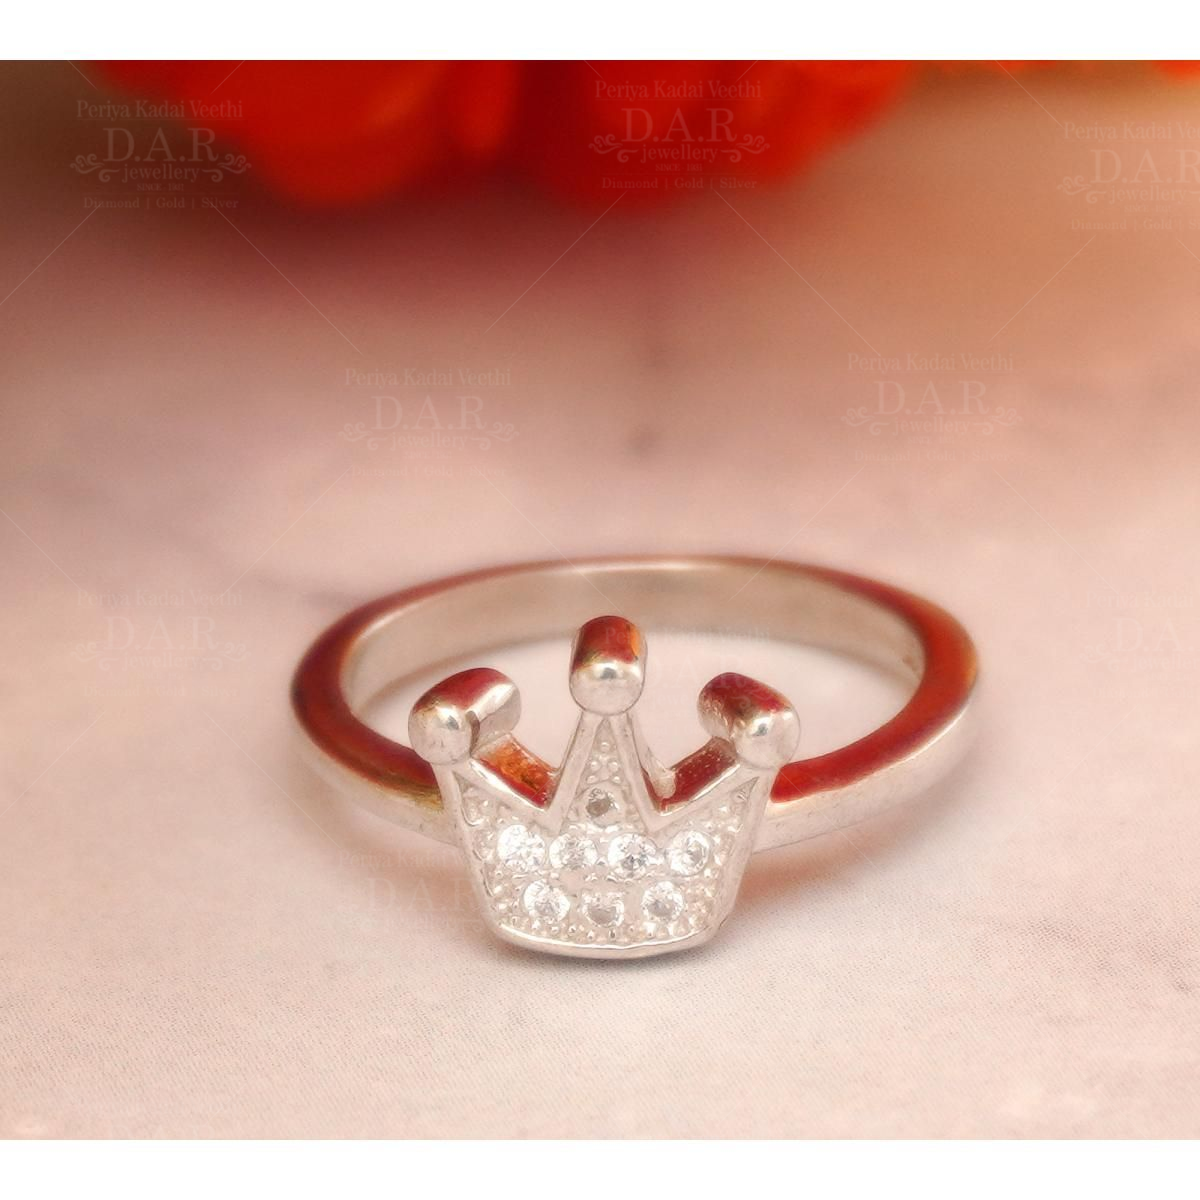 Childrens Gold Rings | Trendy Gold Rings Collections